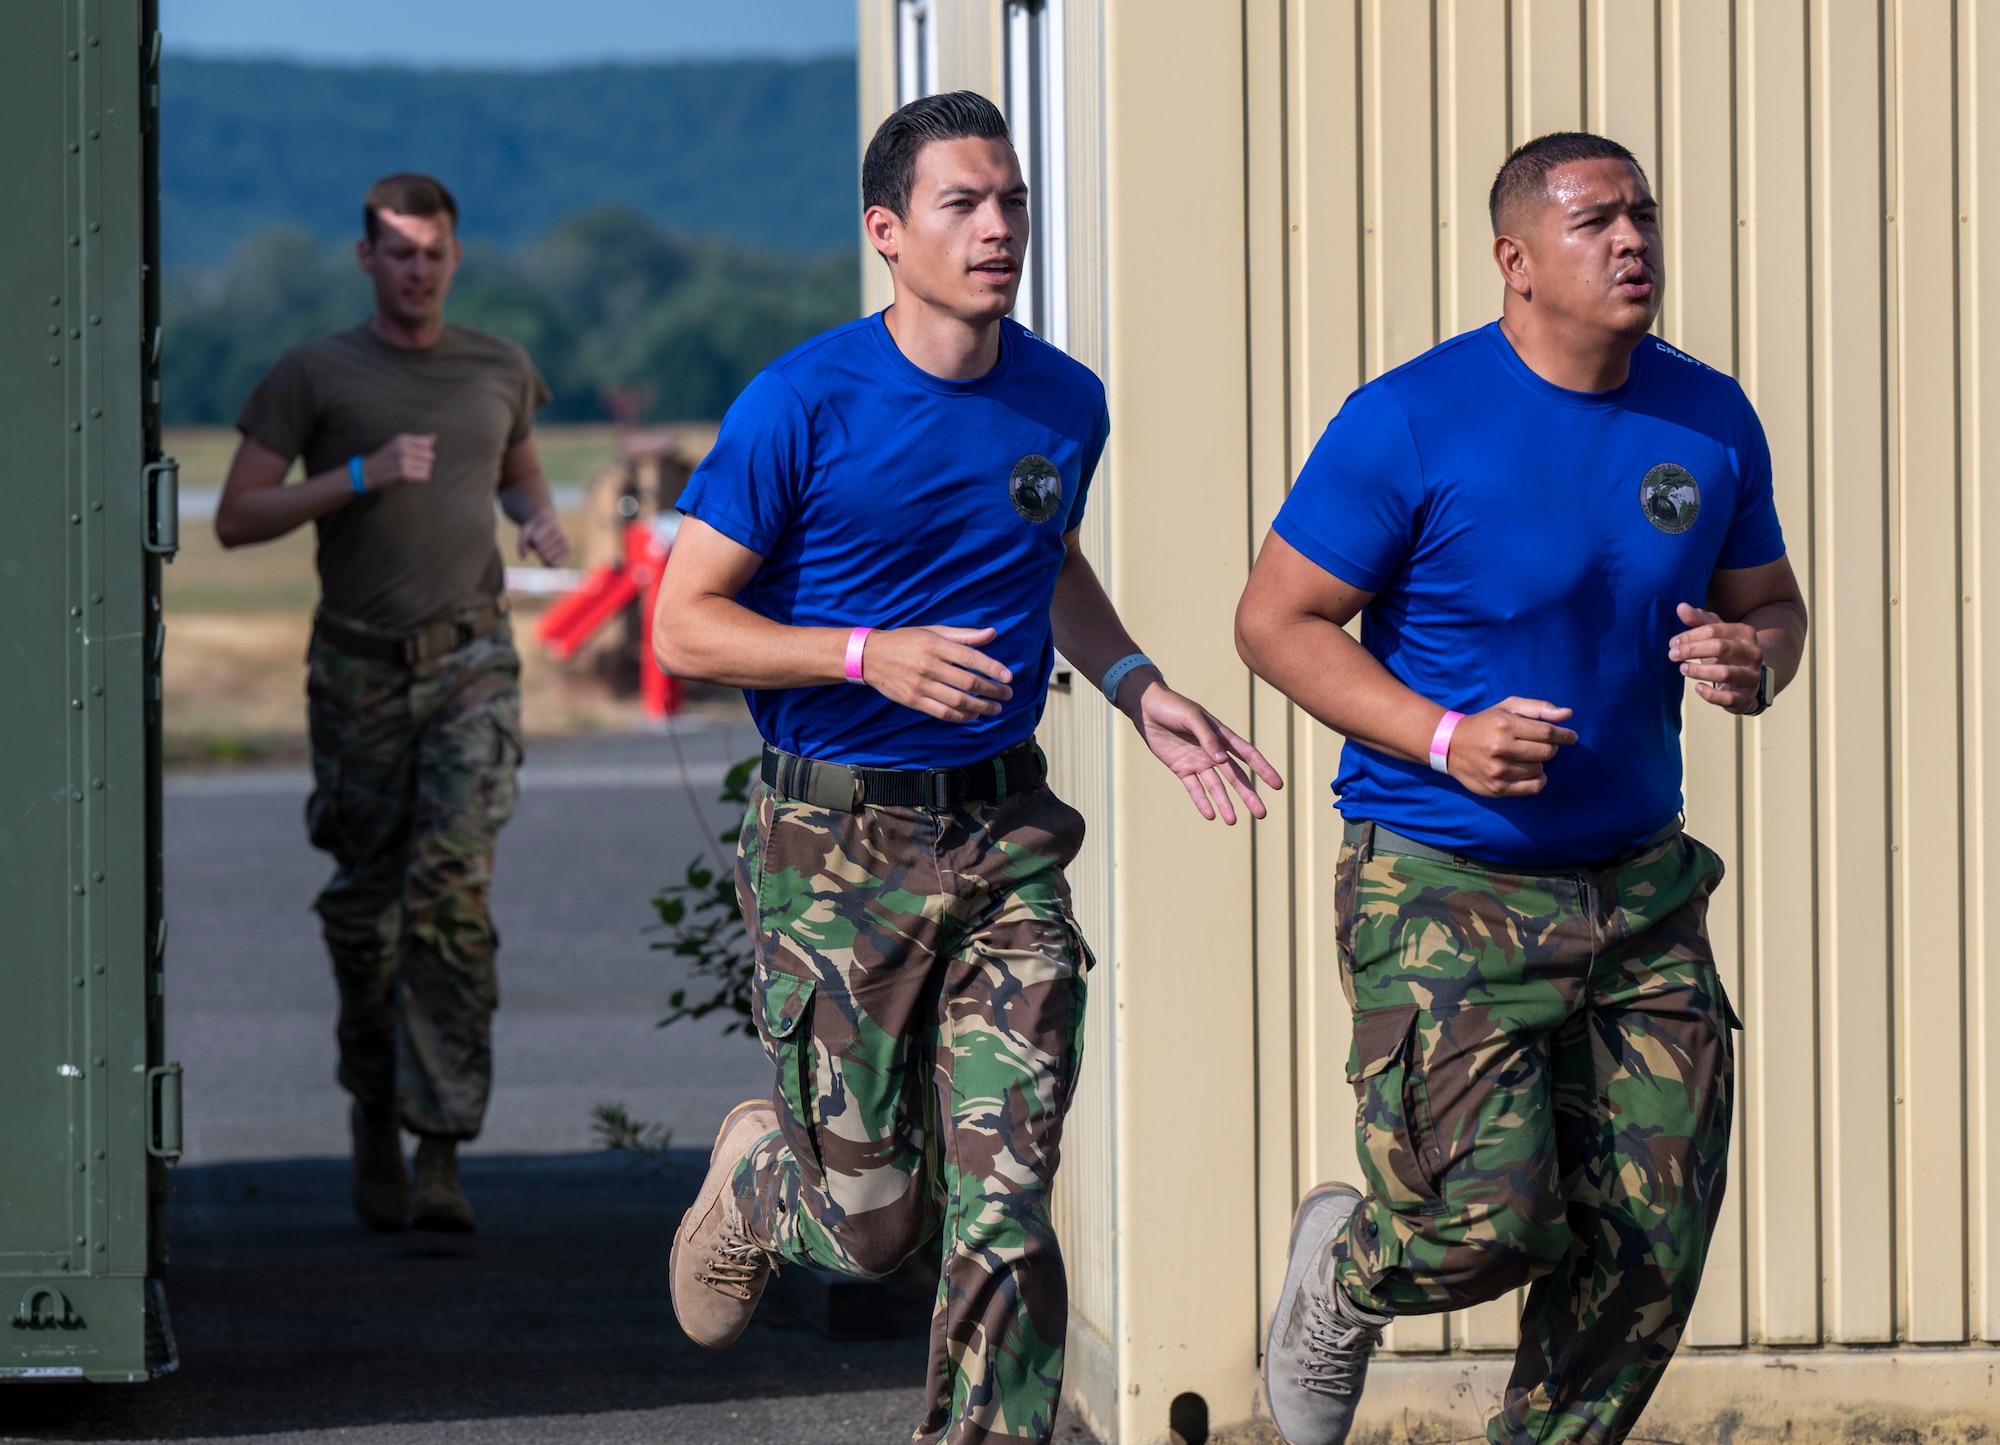 Members of the Royal Netherlands Air Force run alongside a member of the U.S. Air Force during the 521st Air Mobility Operations Wing’s Mobility Rodeo at Ramstein Air Base, Germany, July 11, 2023.